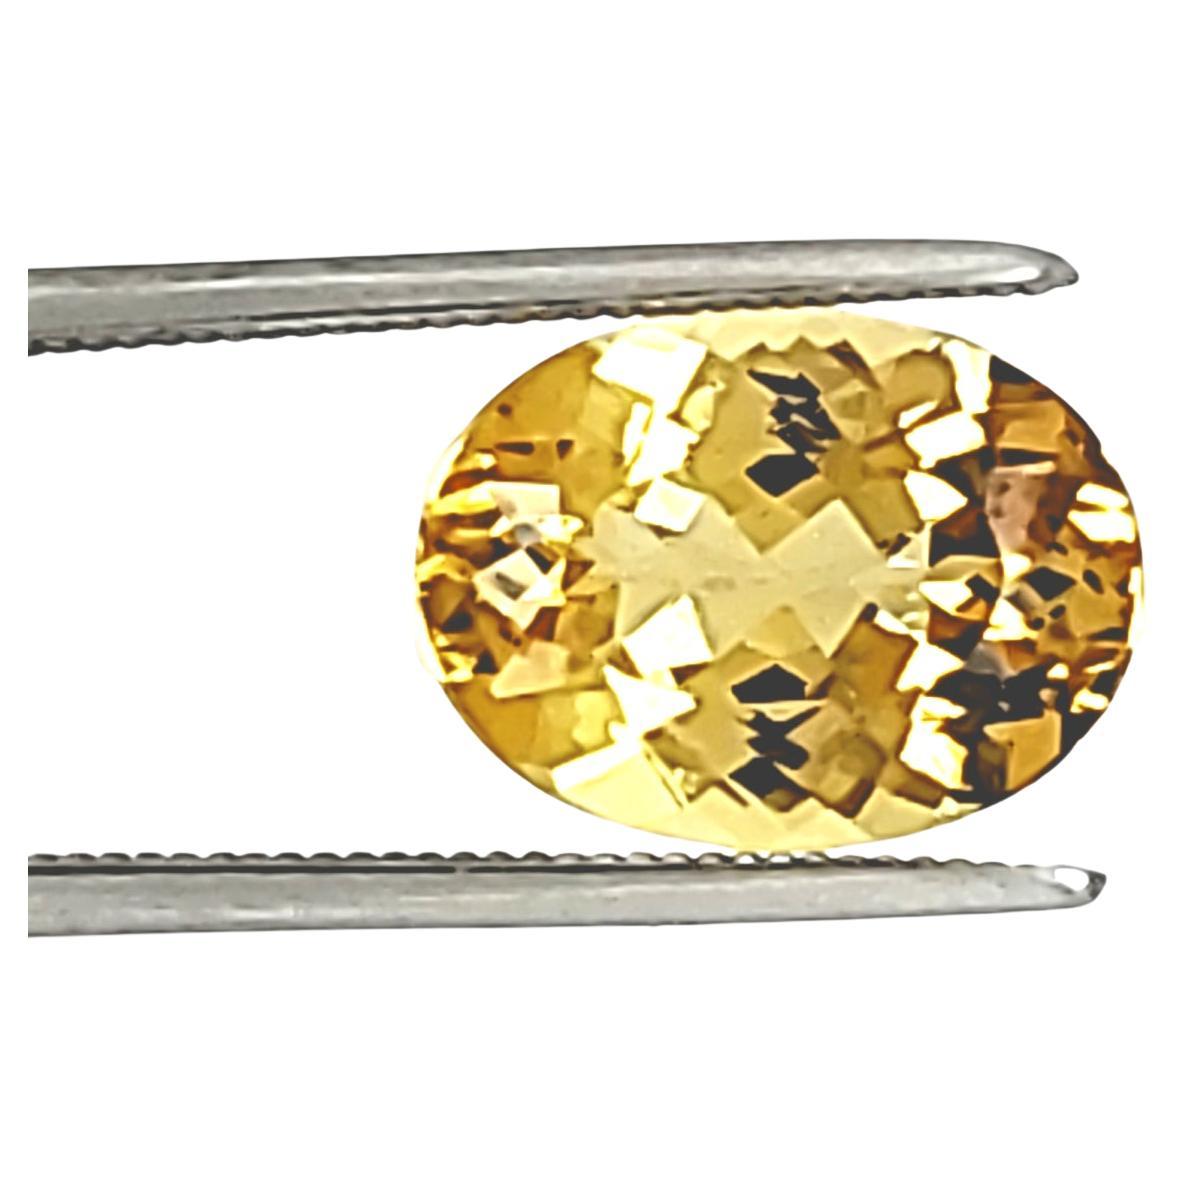 Yellow Topaz with Golden Hints, 2.93ct Oval - Brilliant!